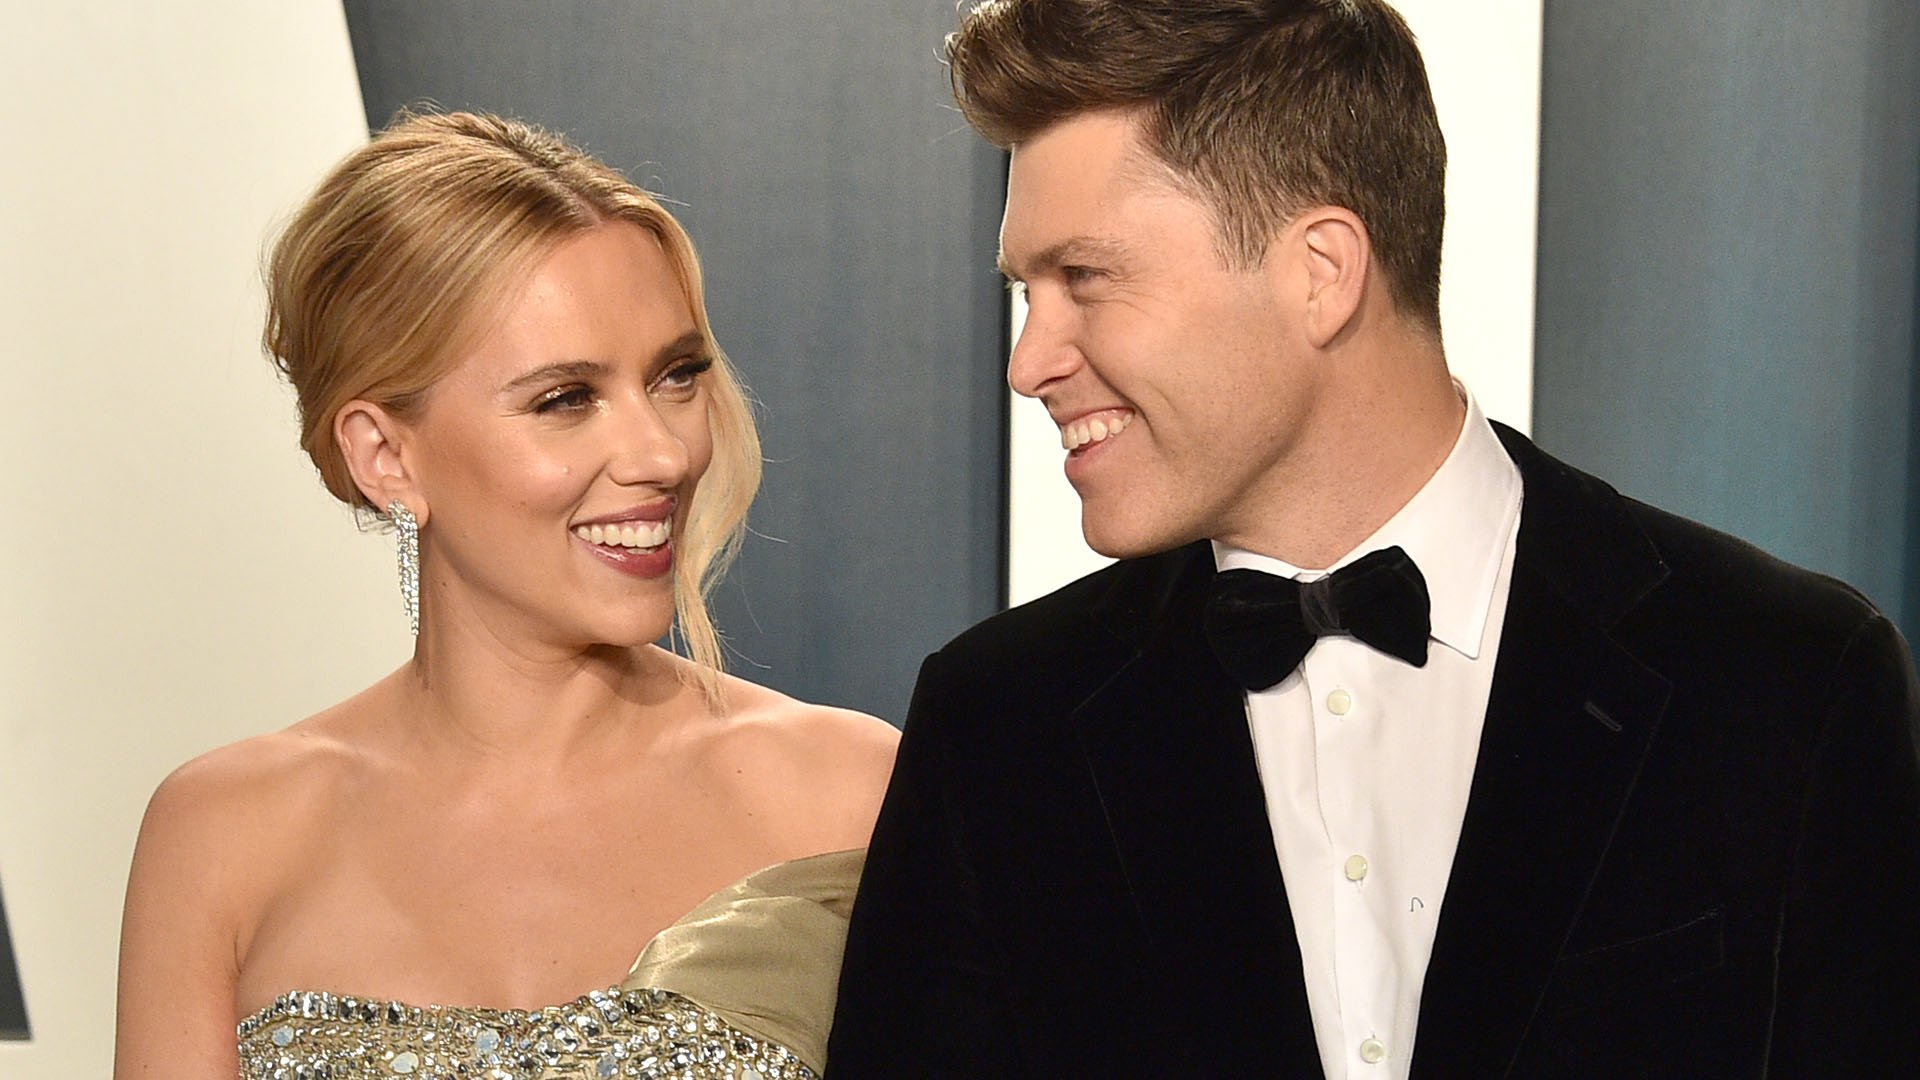 Scarlett Johansson and Colin Jost attend the 2020 Vanity Fair Oscar Party at Wallis Annenberg Center for the Performing Arts on February 09, 2020 in Beverly Hills, California. 